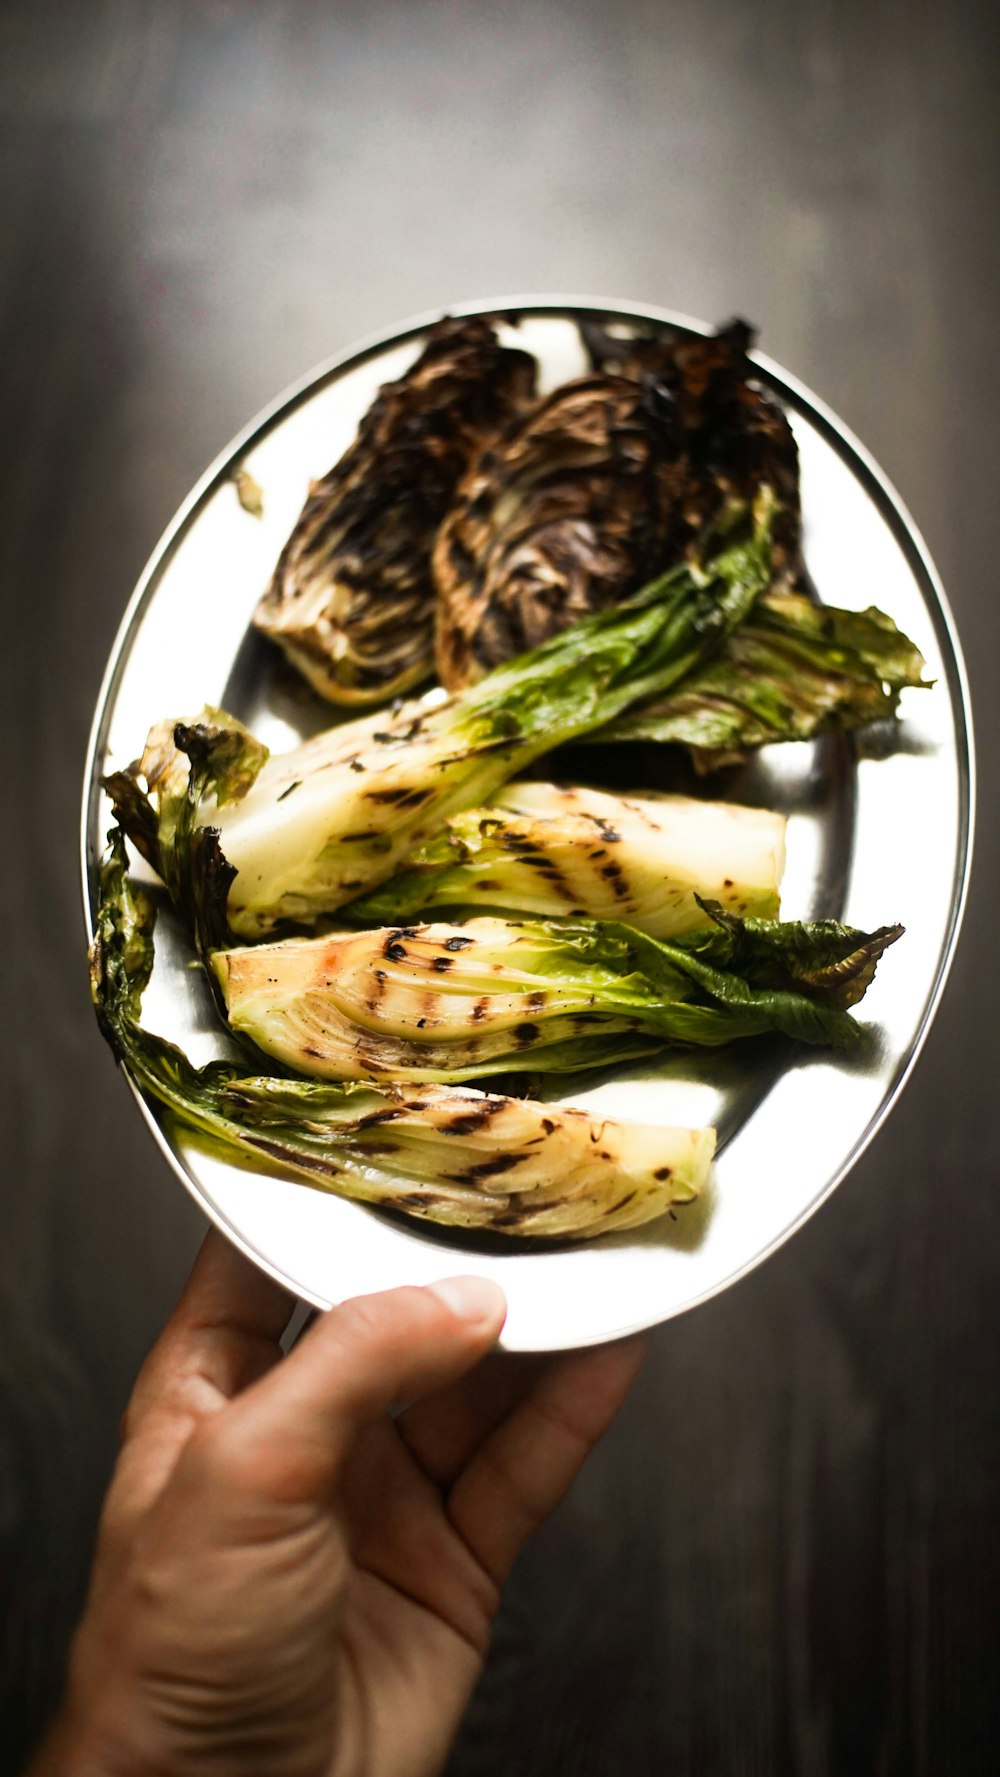 a person holding a plate of grilled vegetables